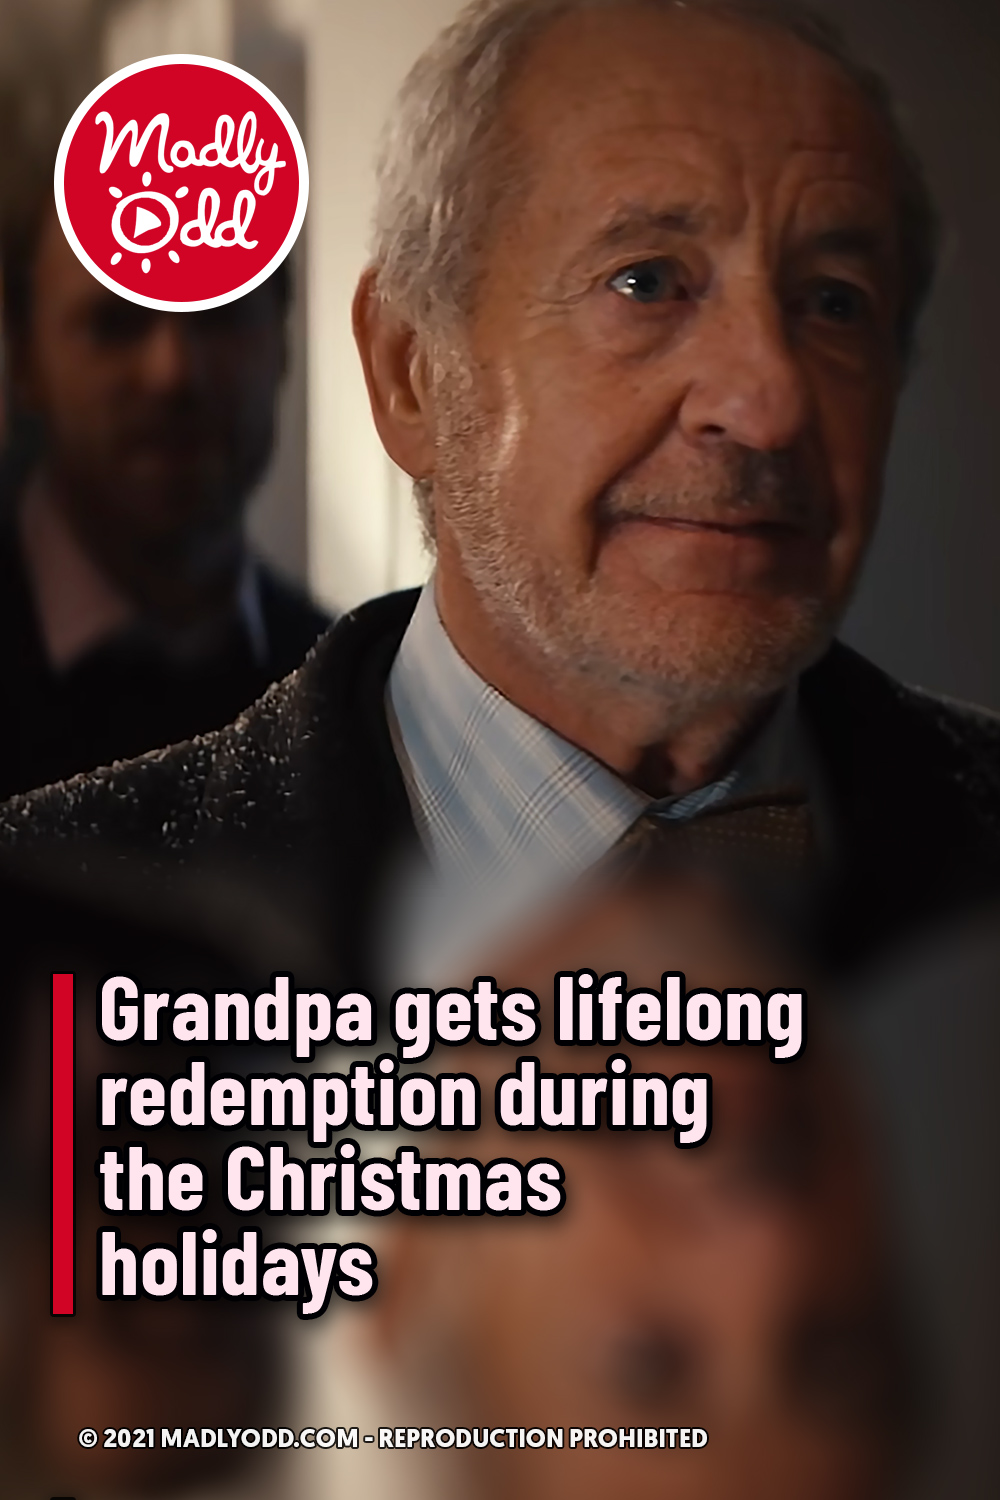 Grandpa gets lifelong redemption during the Christmas holidays